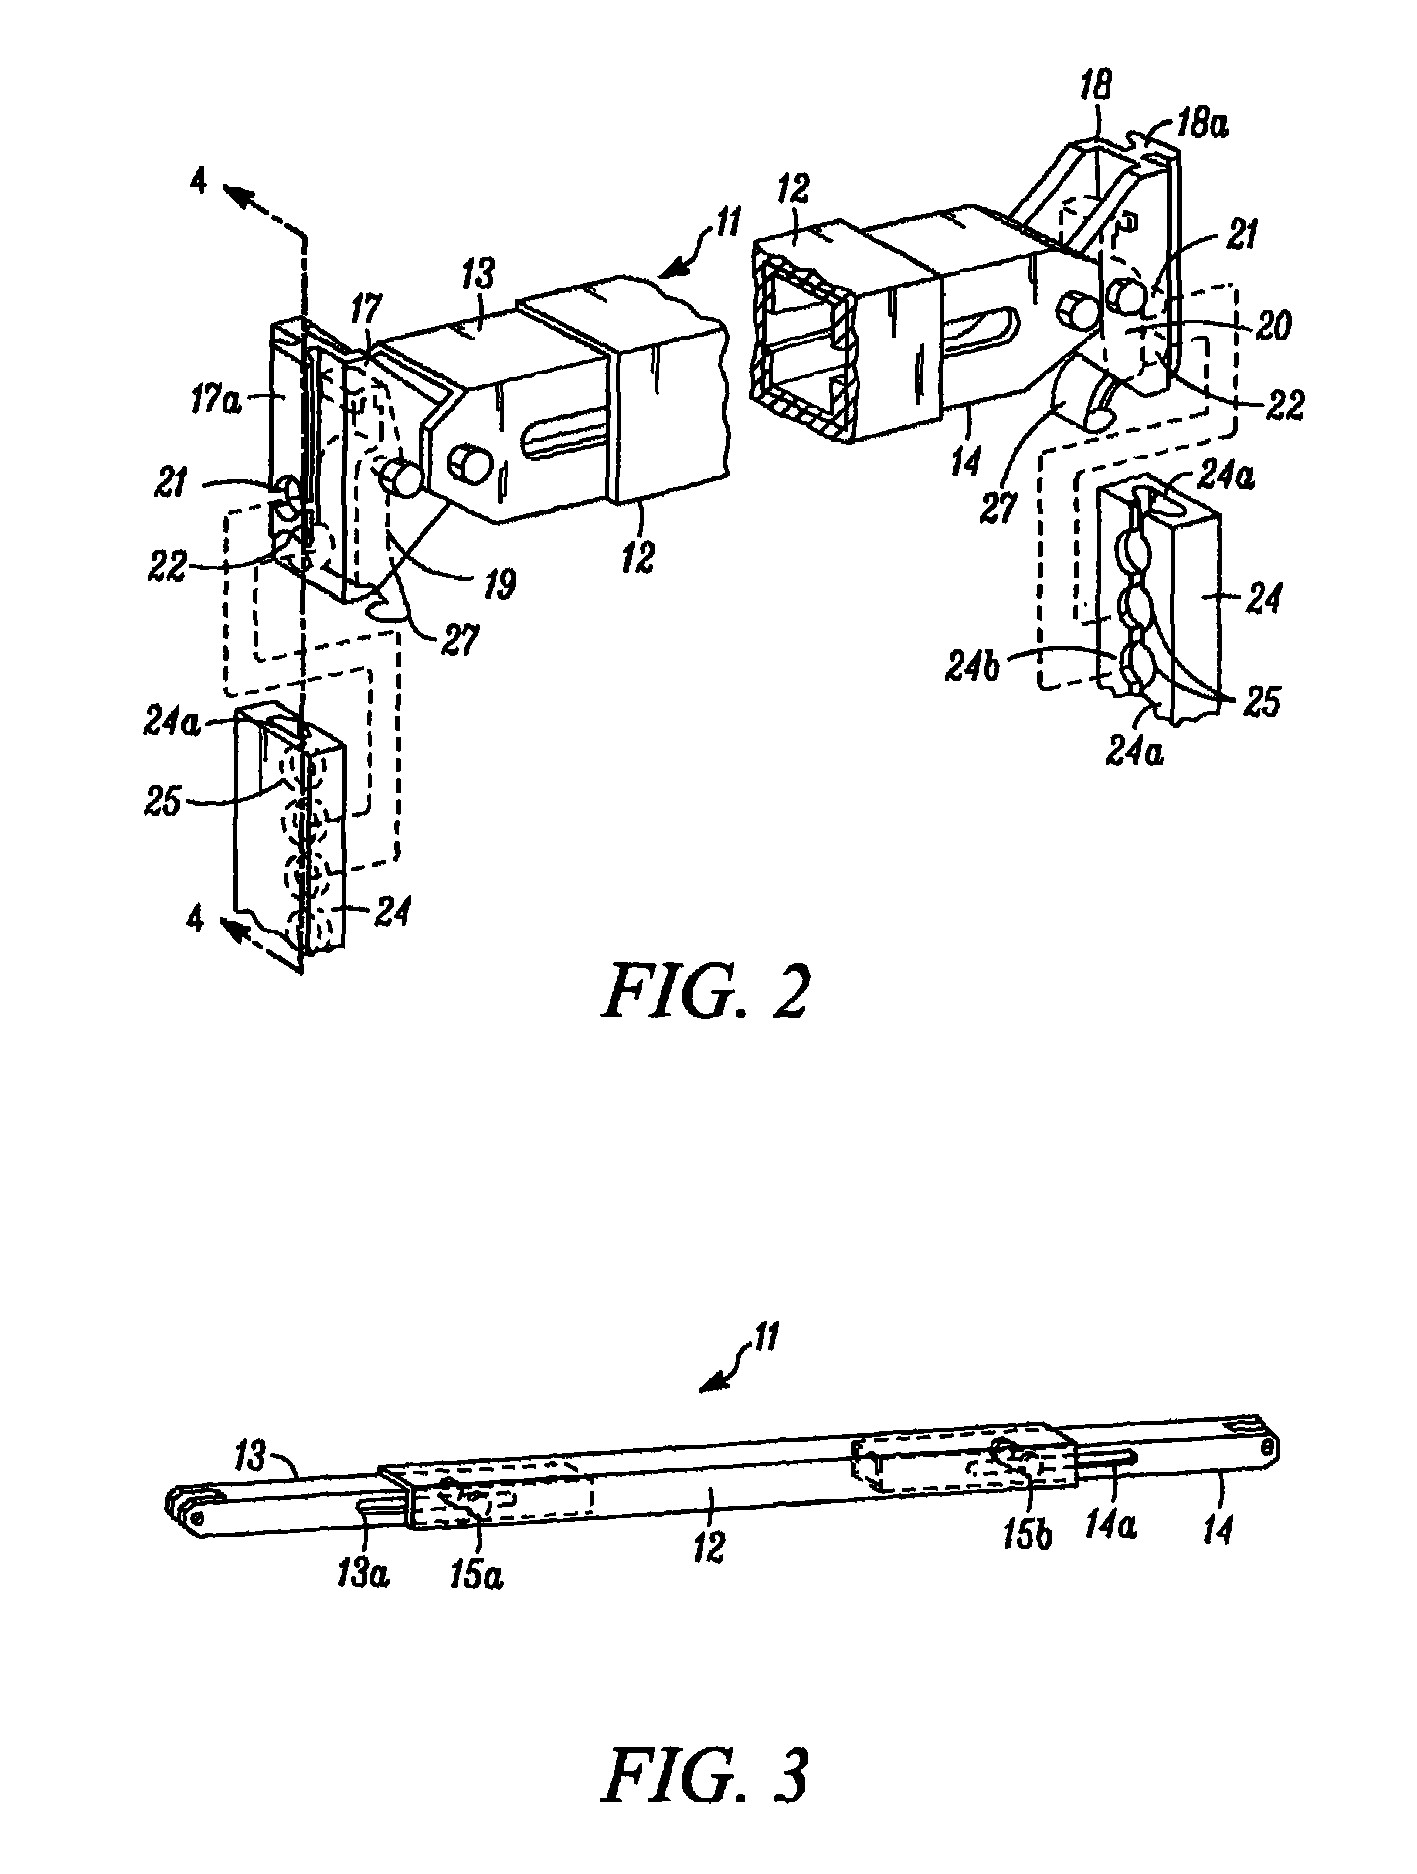 Adjustable decking system for supporting freight